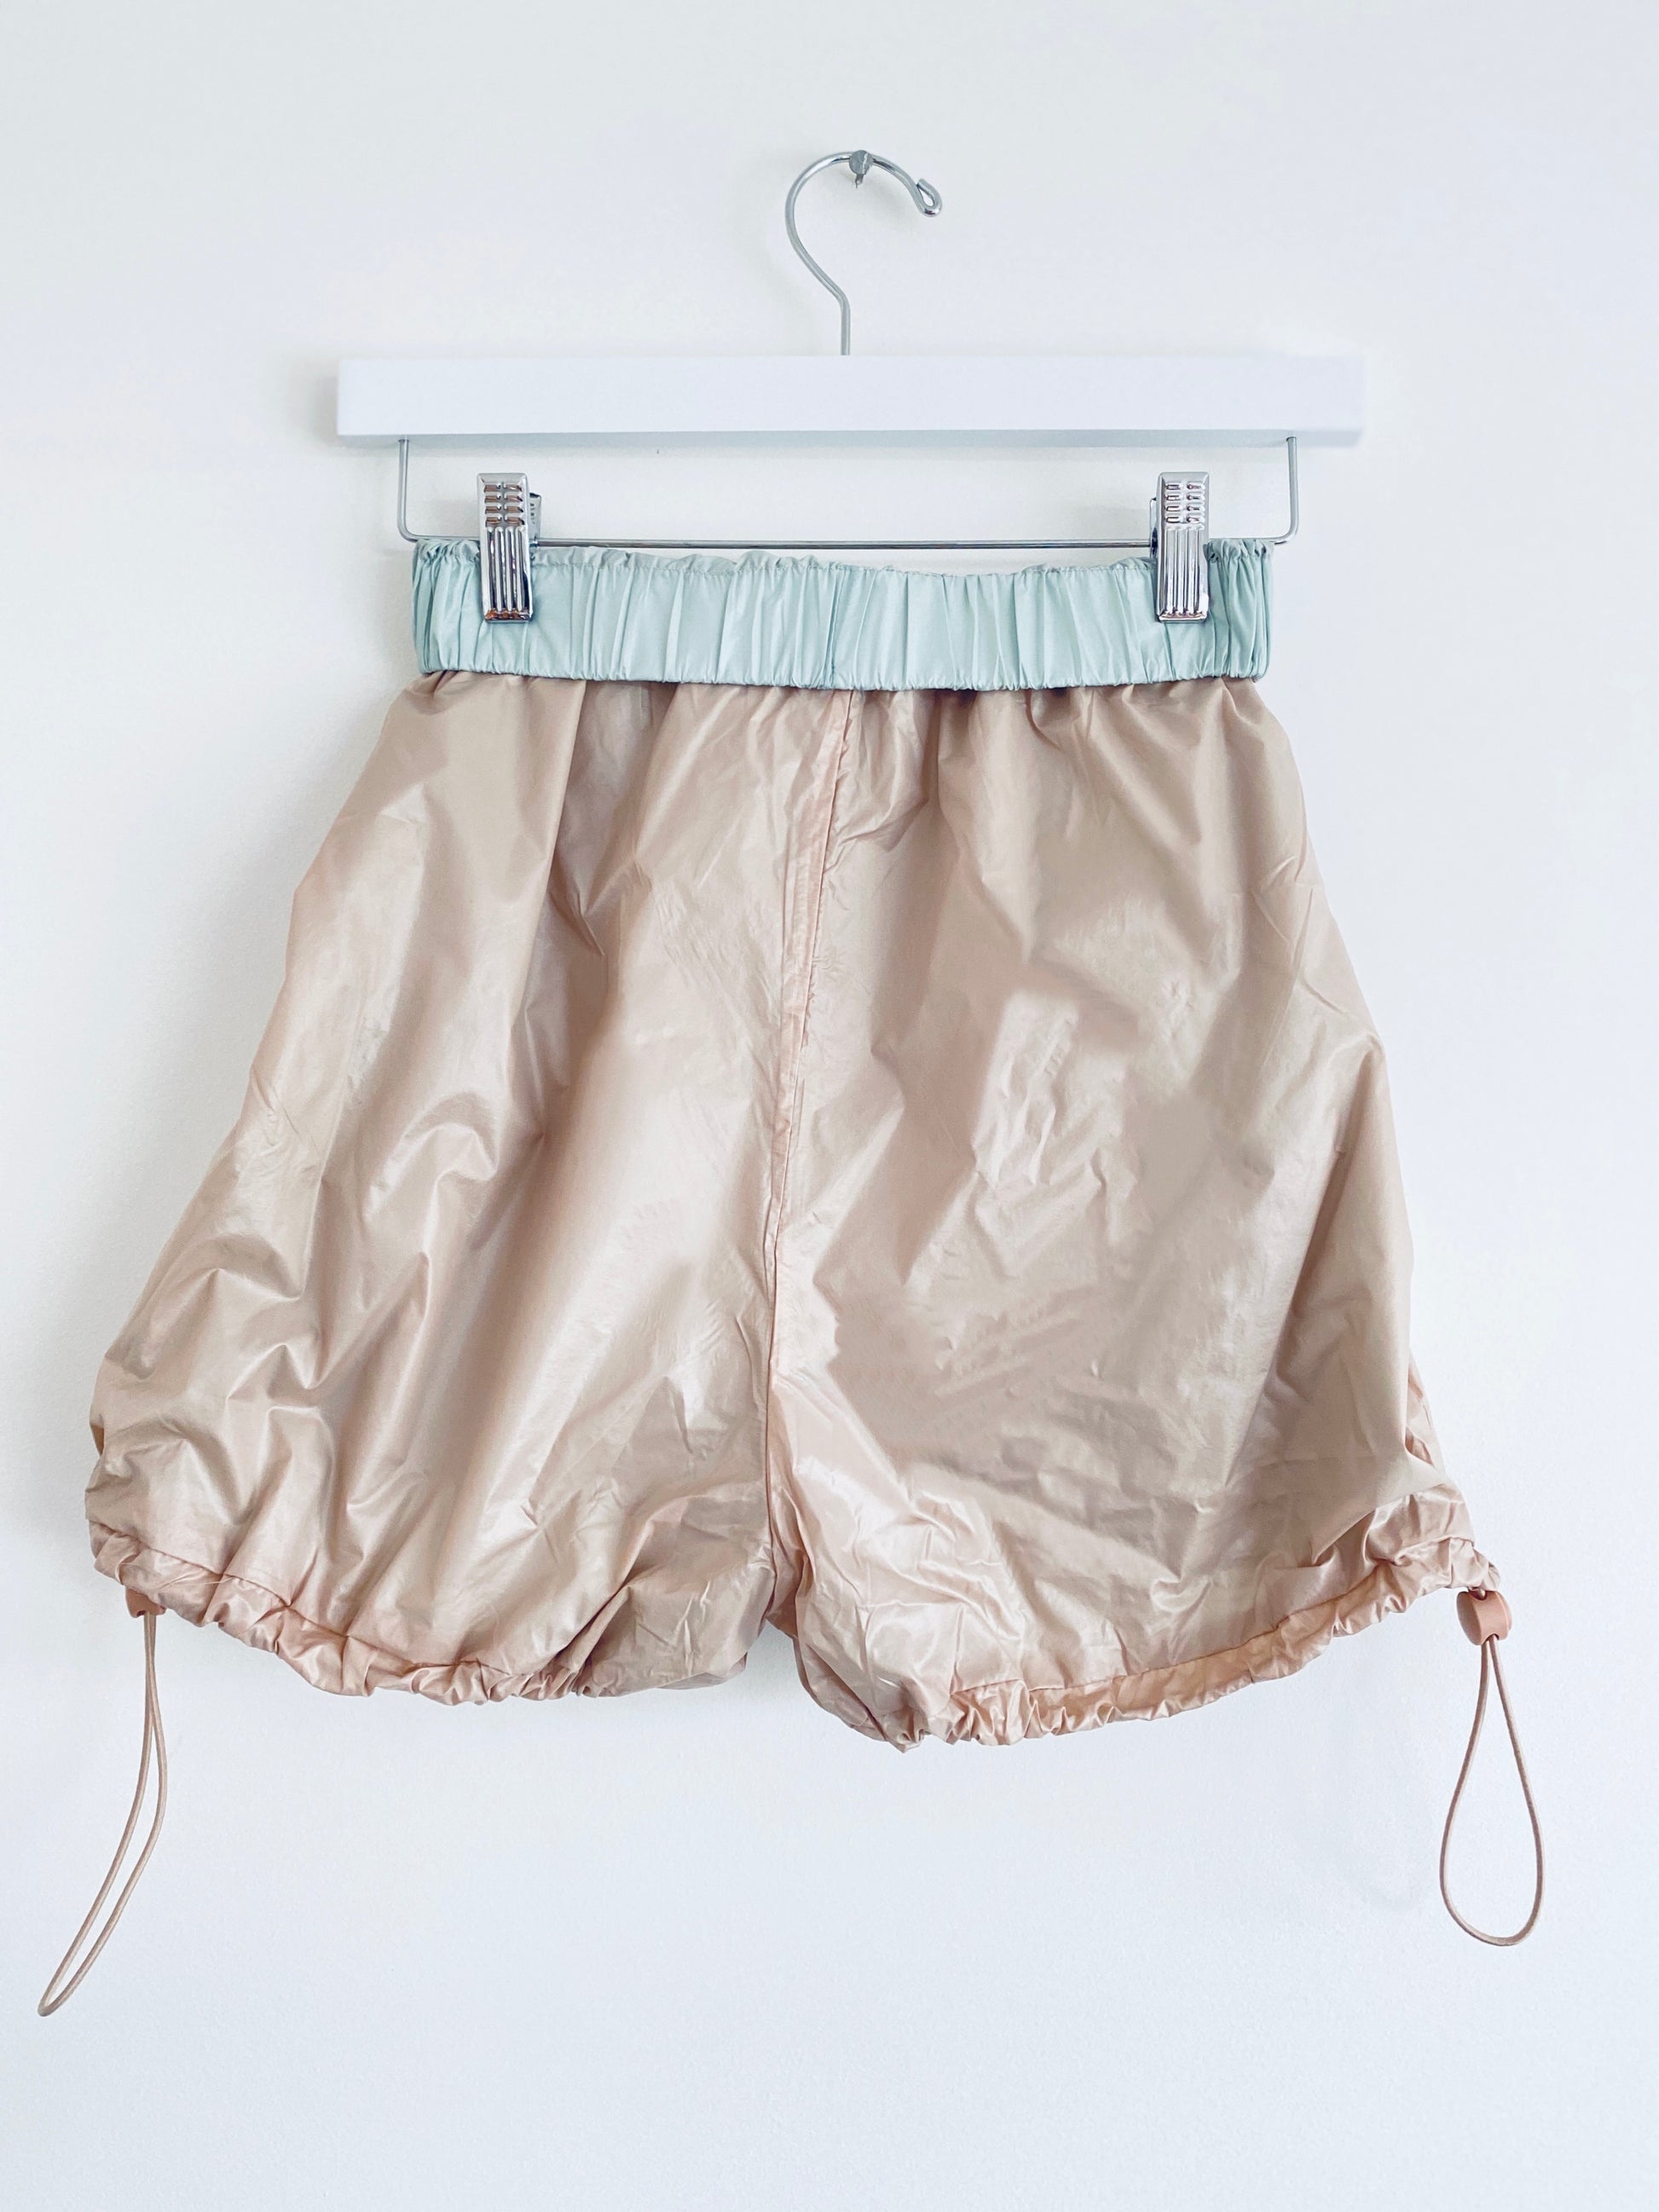 Reversible Trash Shorts in mint and beige from The Collective Dancewear